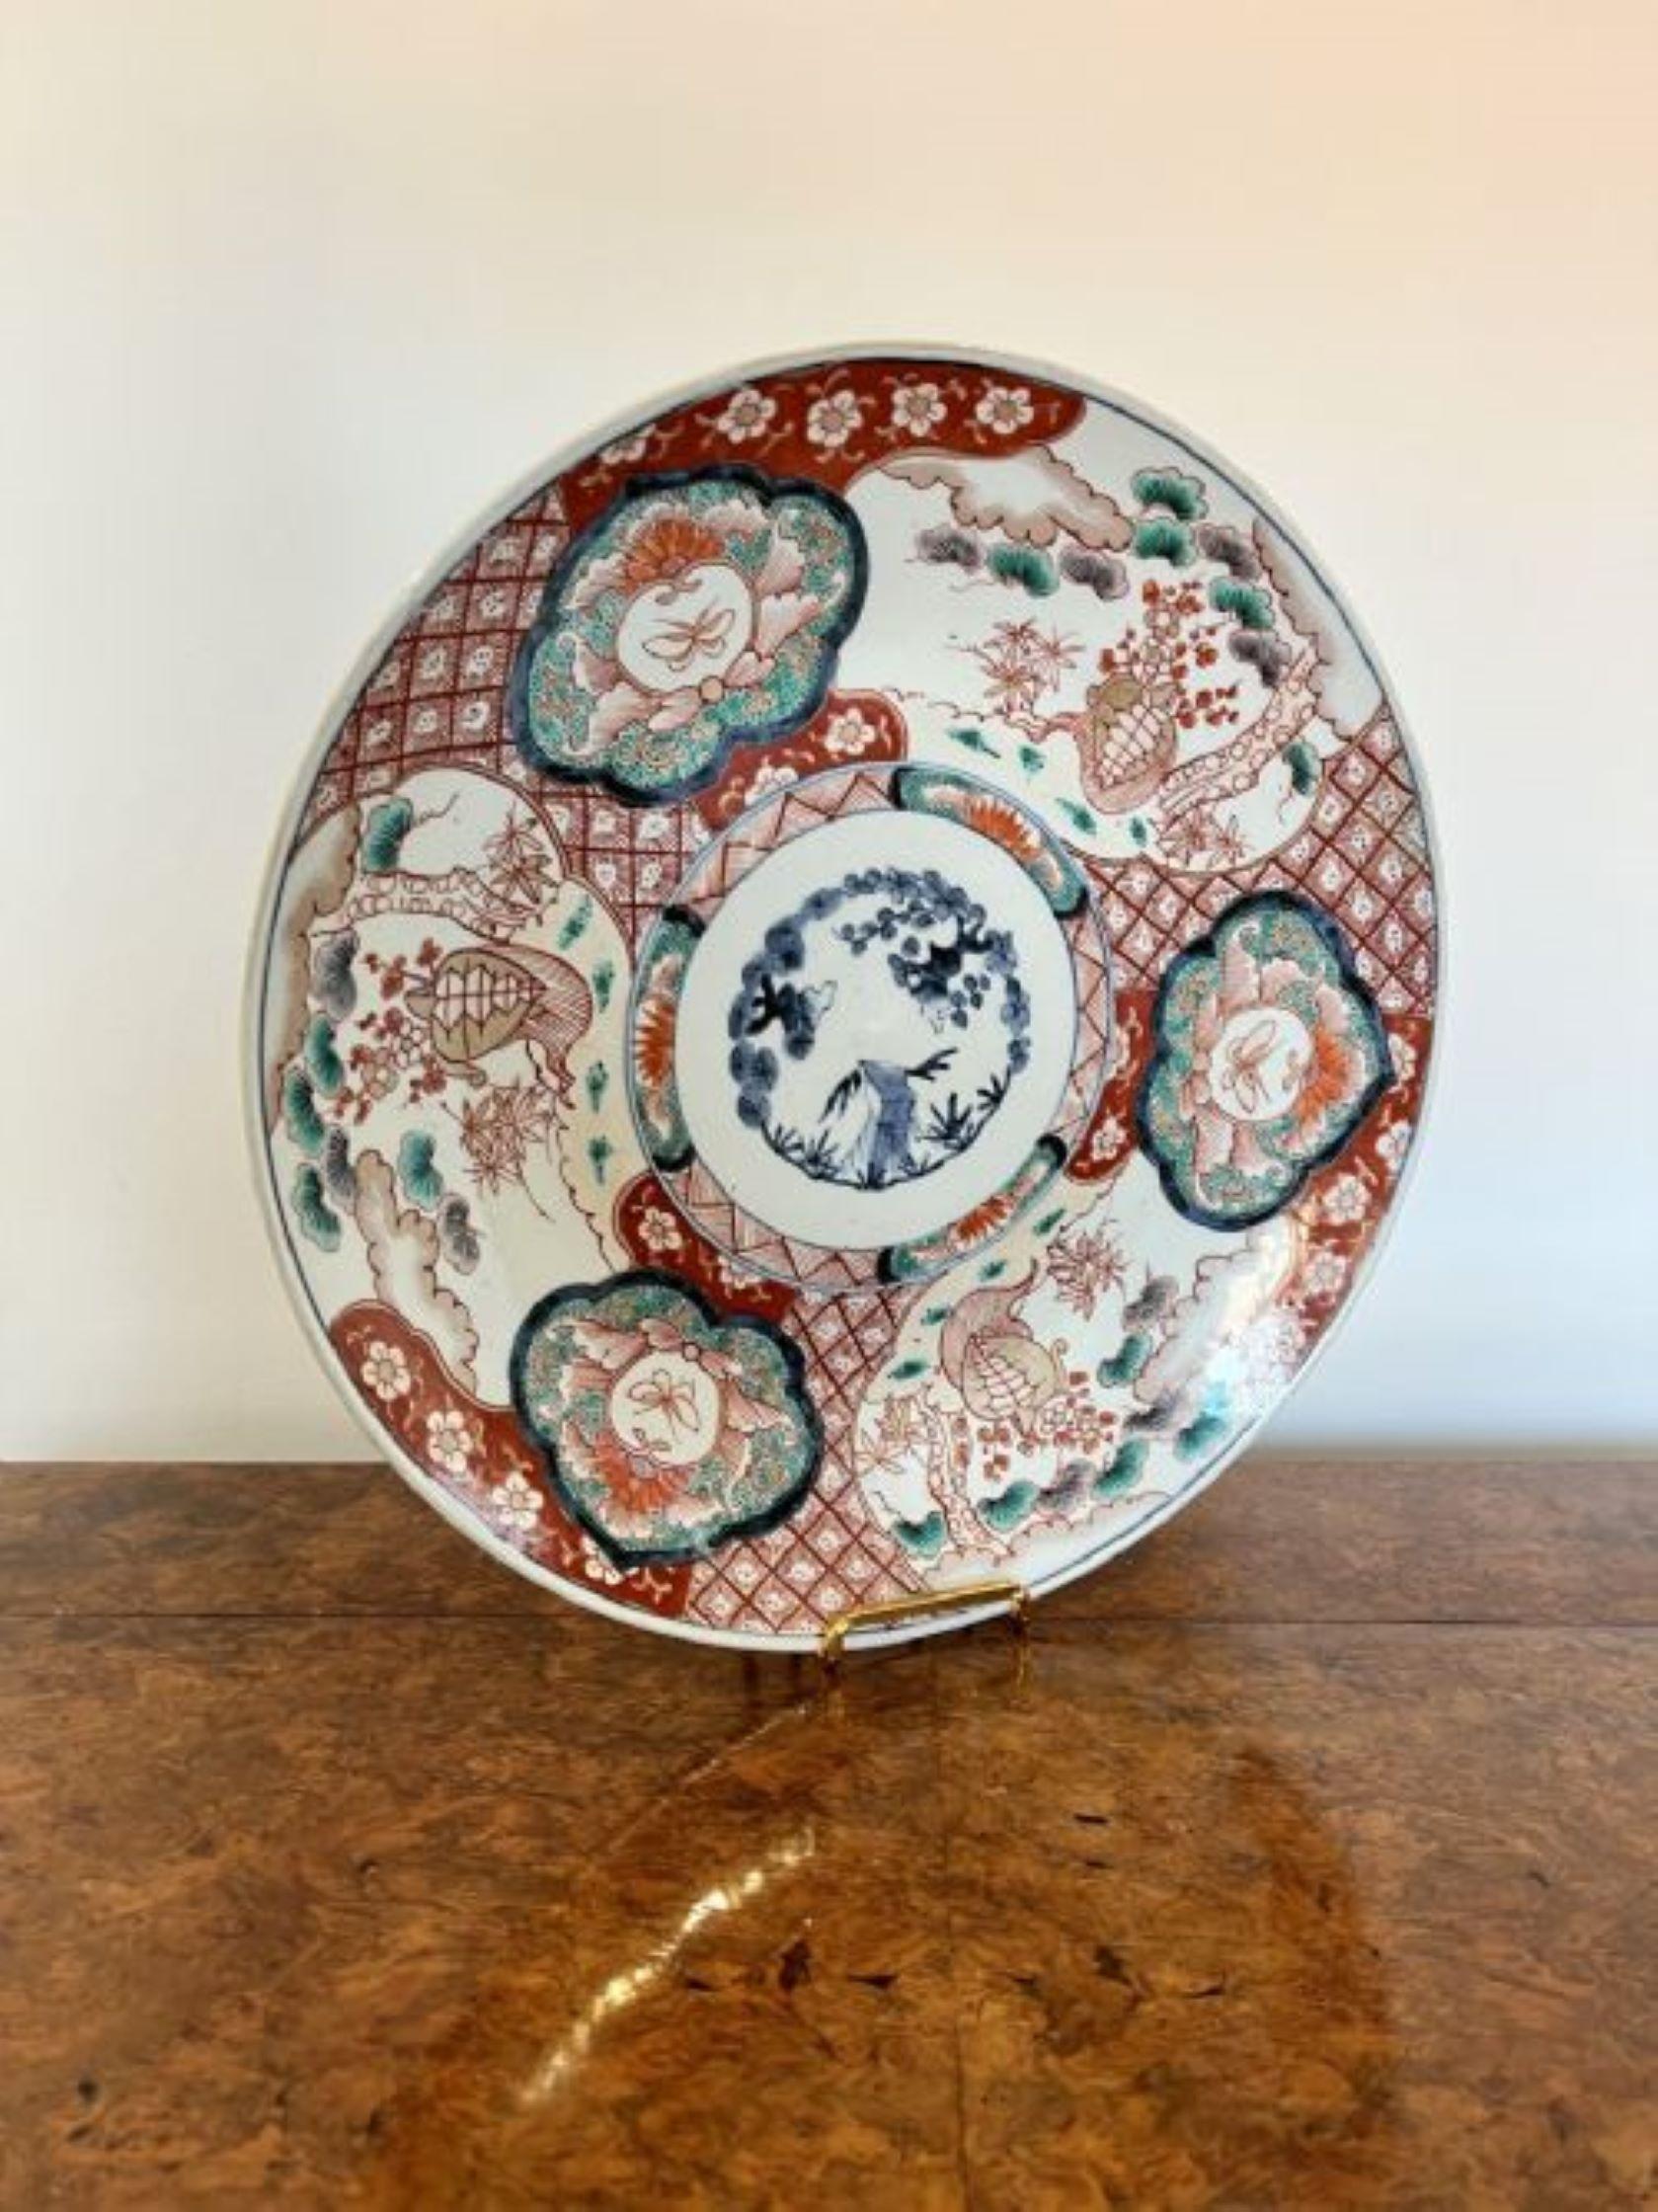 Quality antique Japanese Imari plate having a quality antique Japanese Imari charger having wonderful hand painted panels with flowers and foliage in red, blue, orange, green and white colours. 